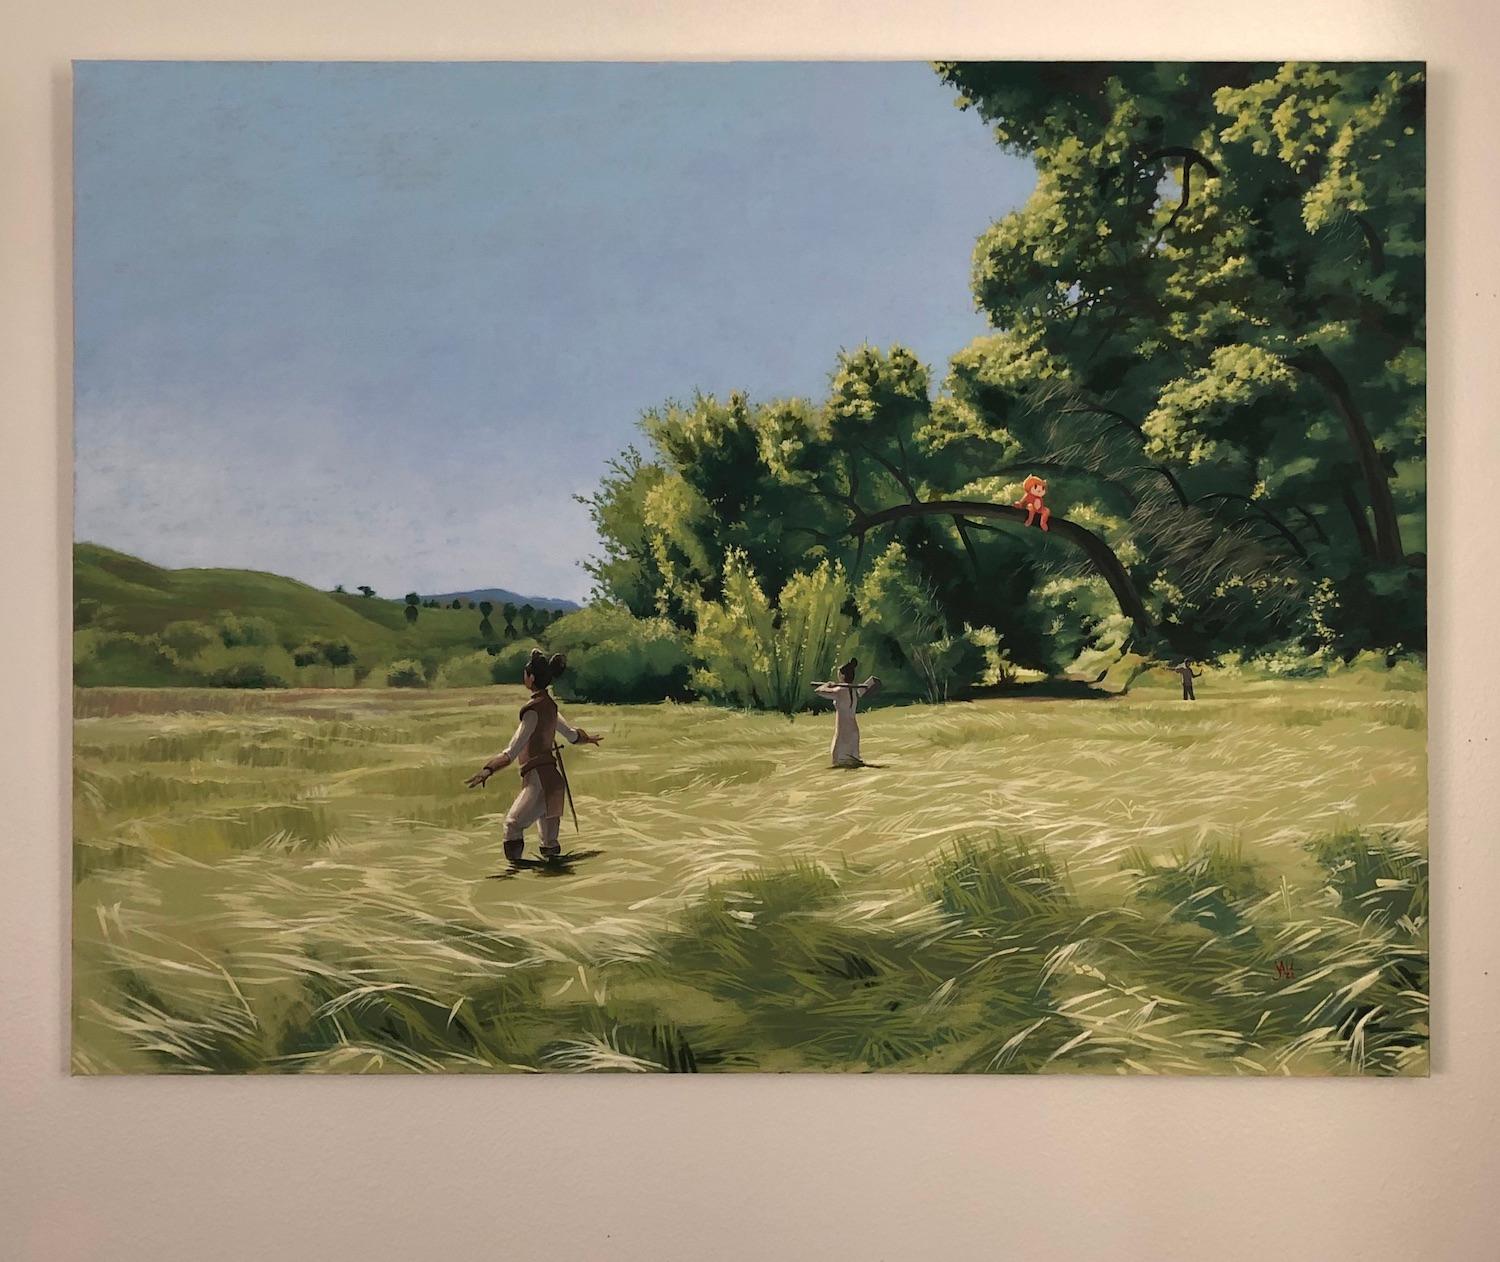 <p>Artist Comments<br>Artist Jesse Aldana displays a verdant savannah in detailed realism. Lush greenery thrives throughout the panoramic view. Under a bright morning sky, a group of costumed friends plays hide and seek. They sweep the tall, spring